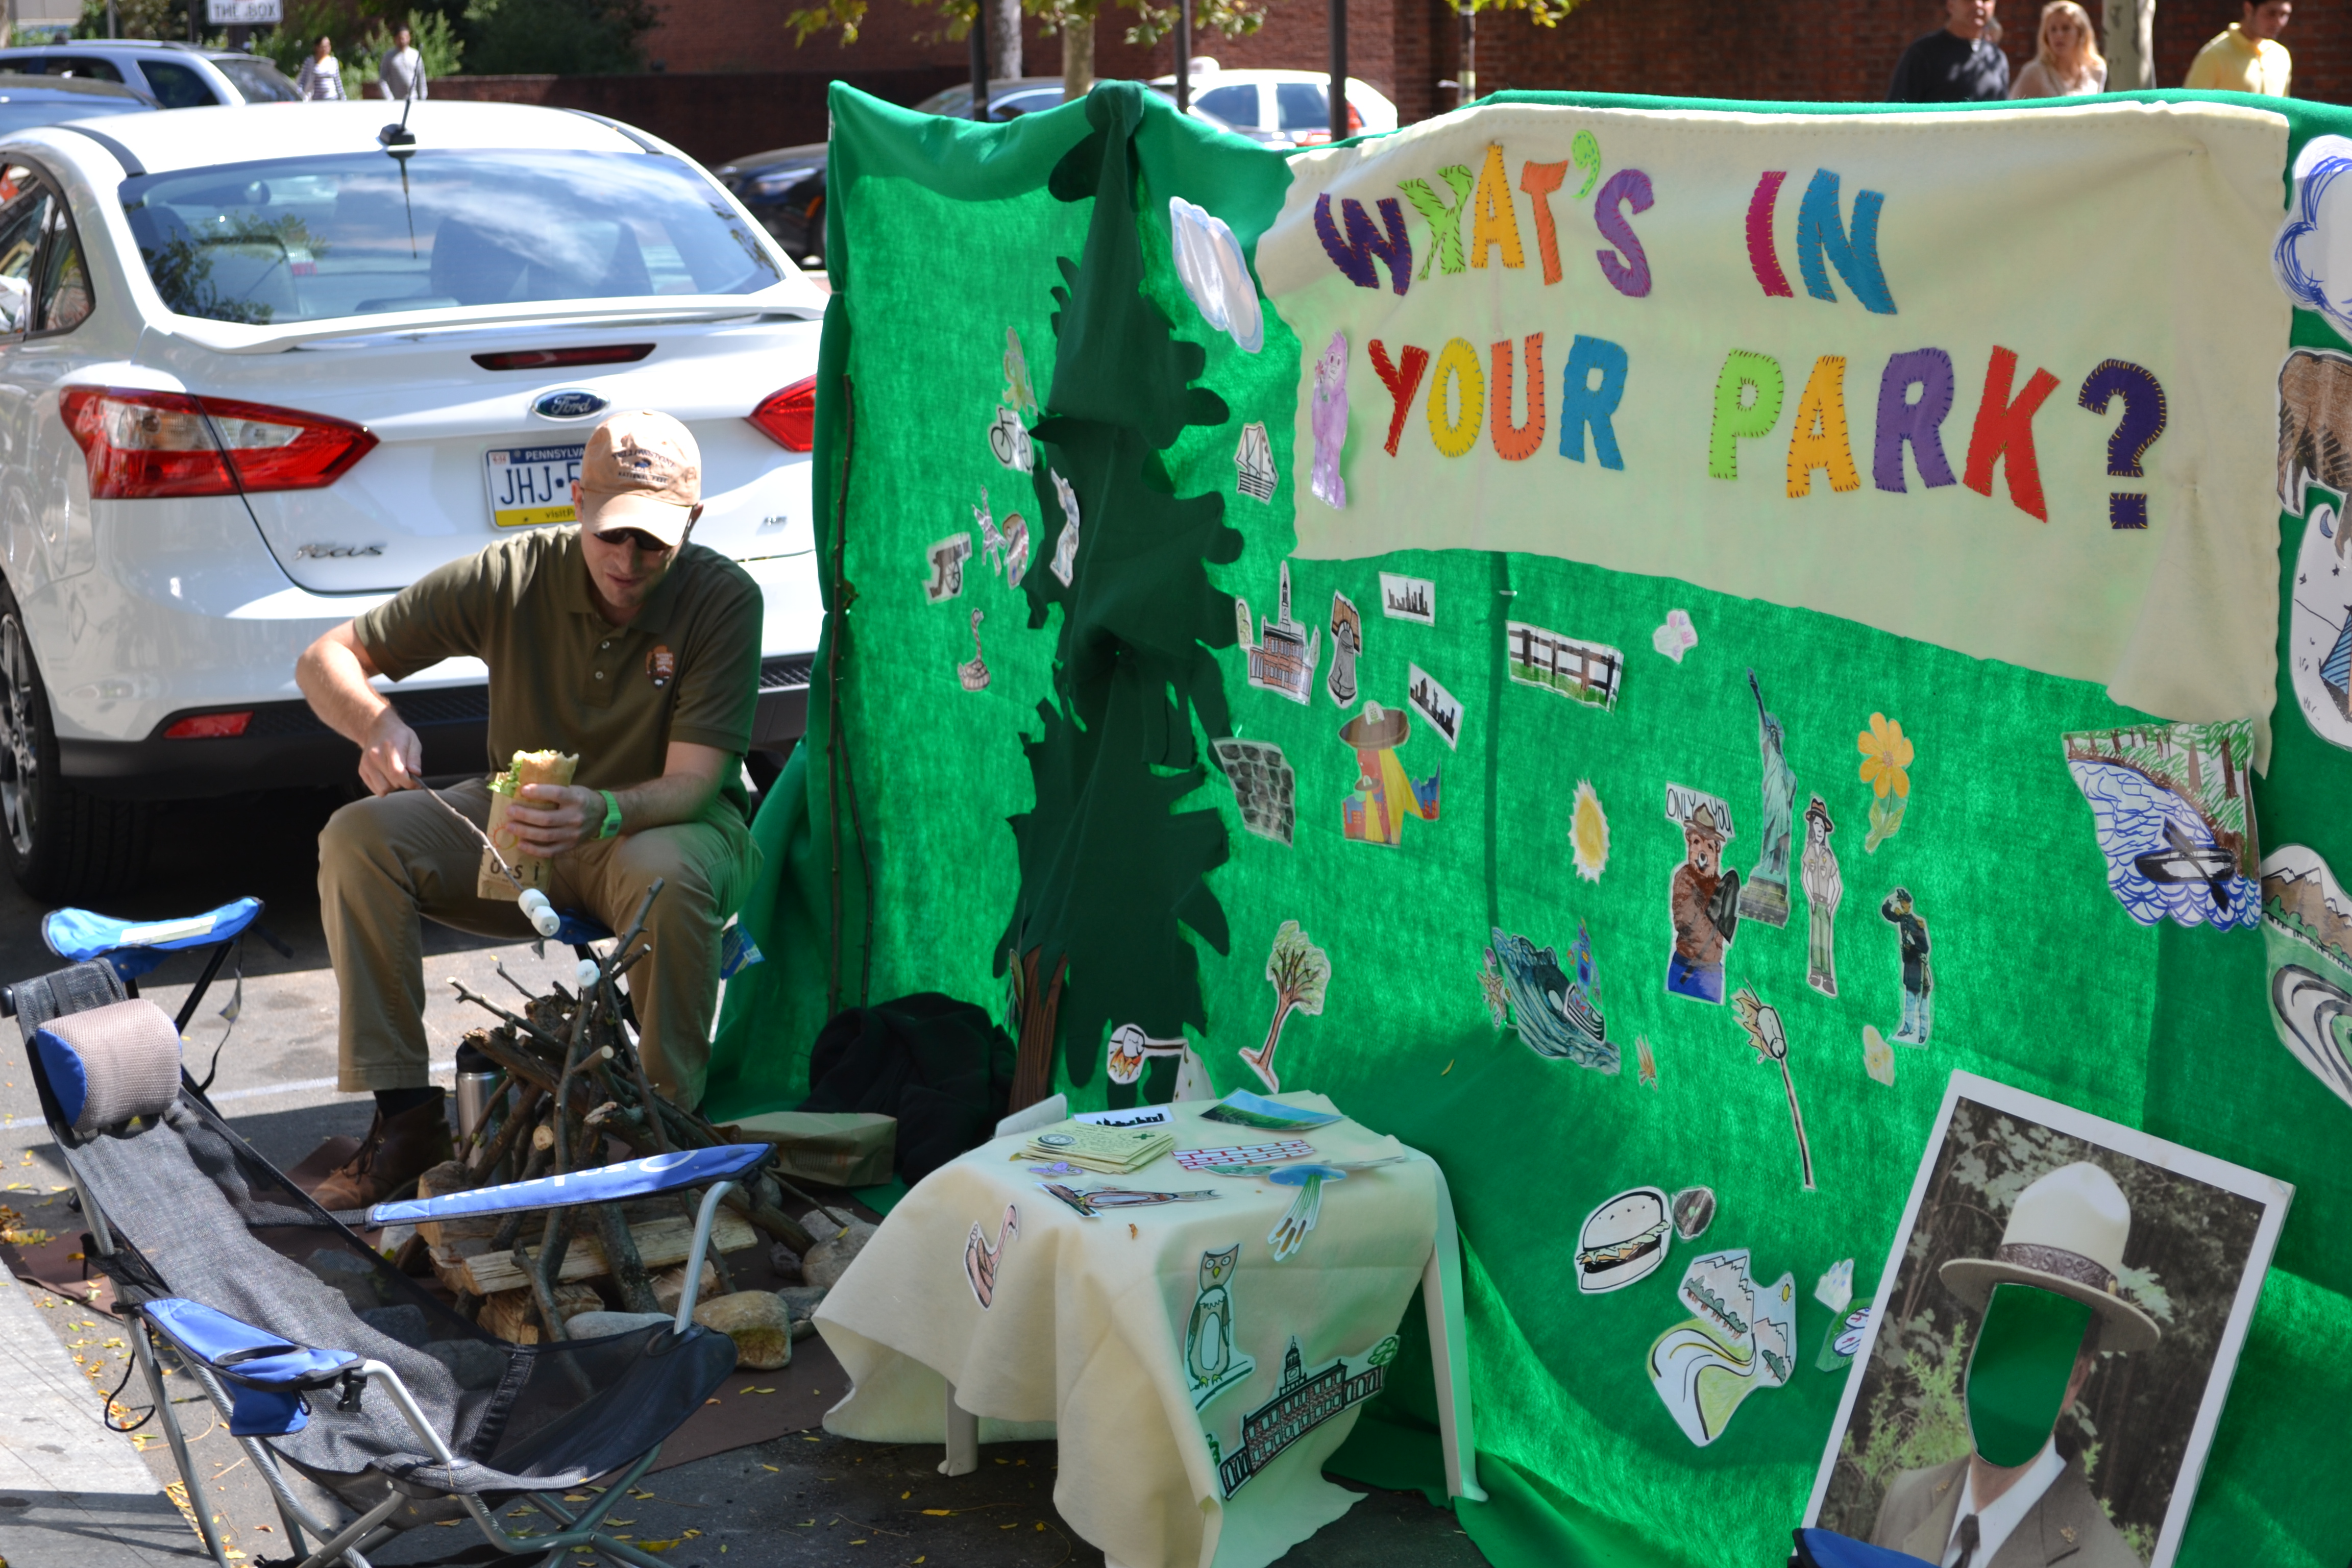 Park(ing) Day: National Park Service